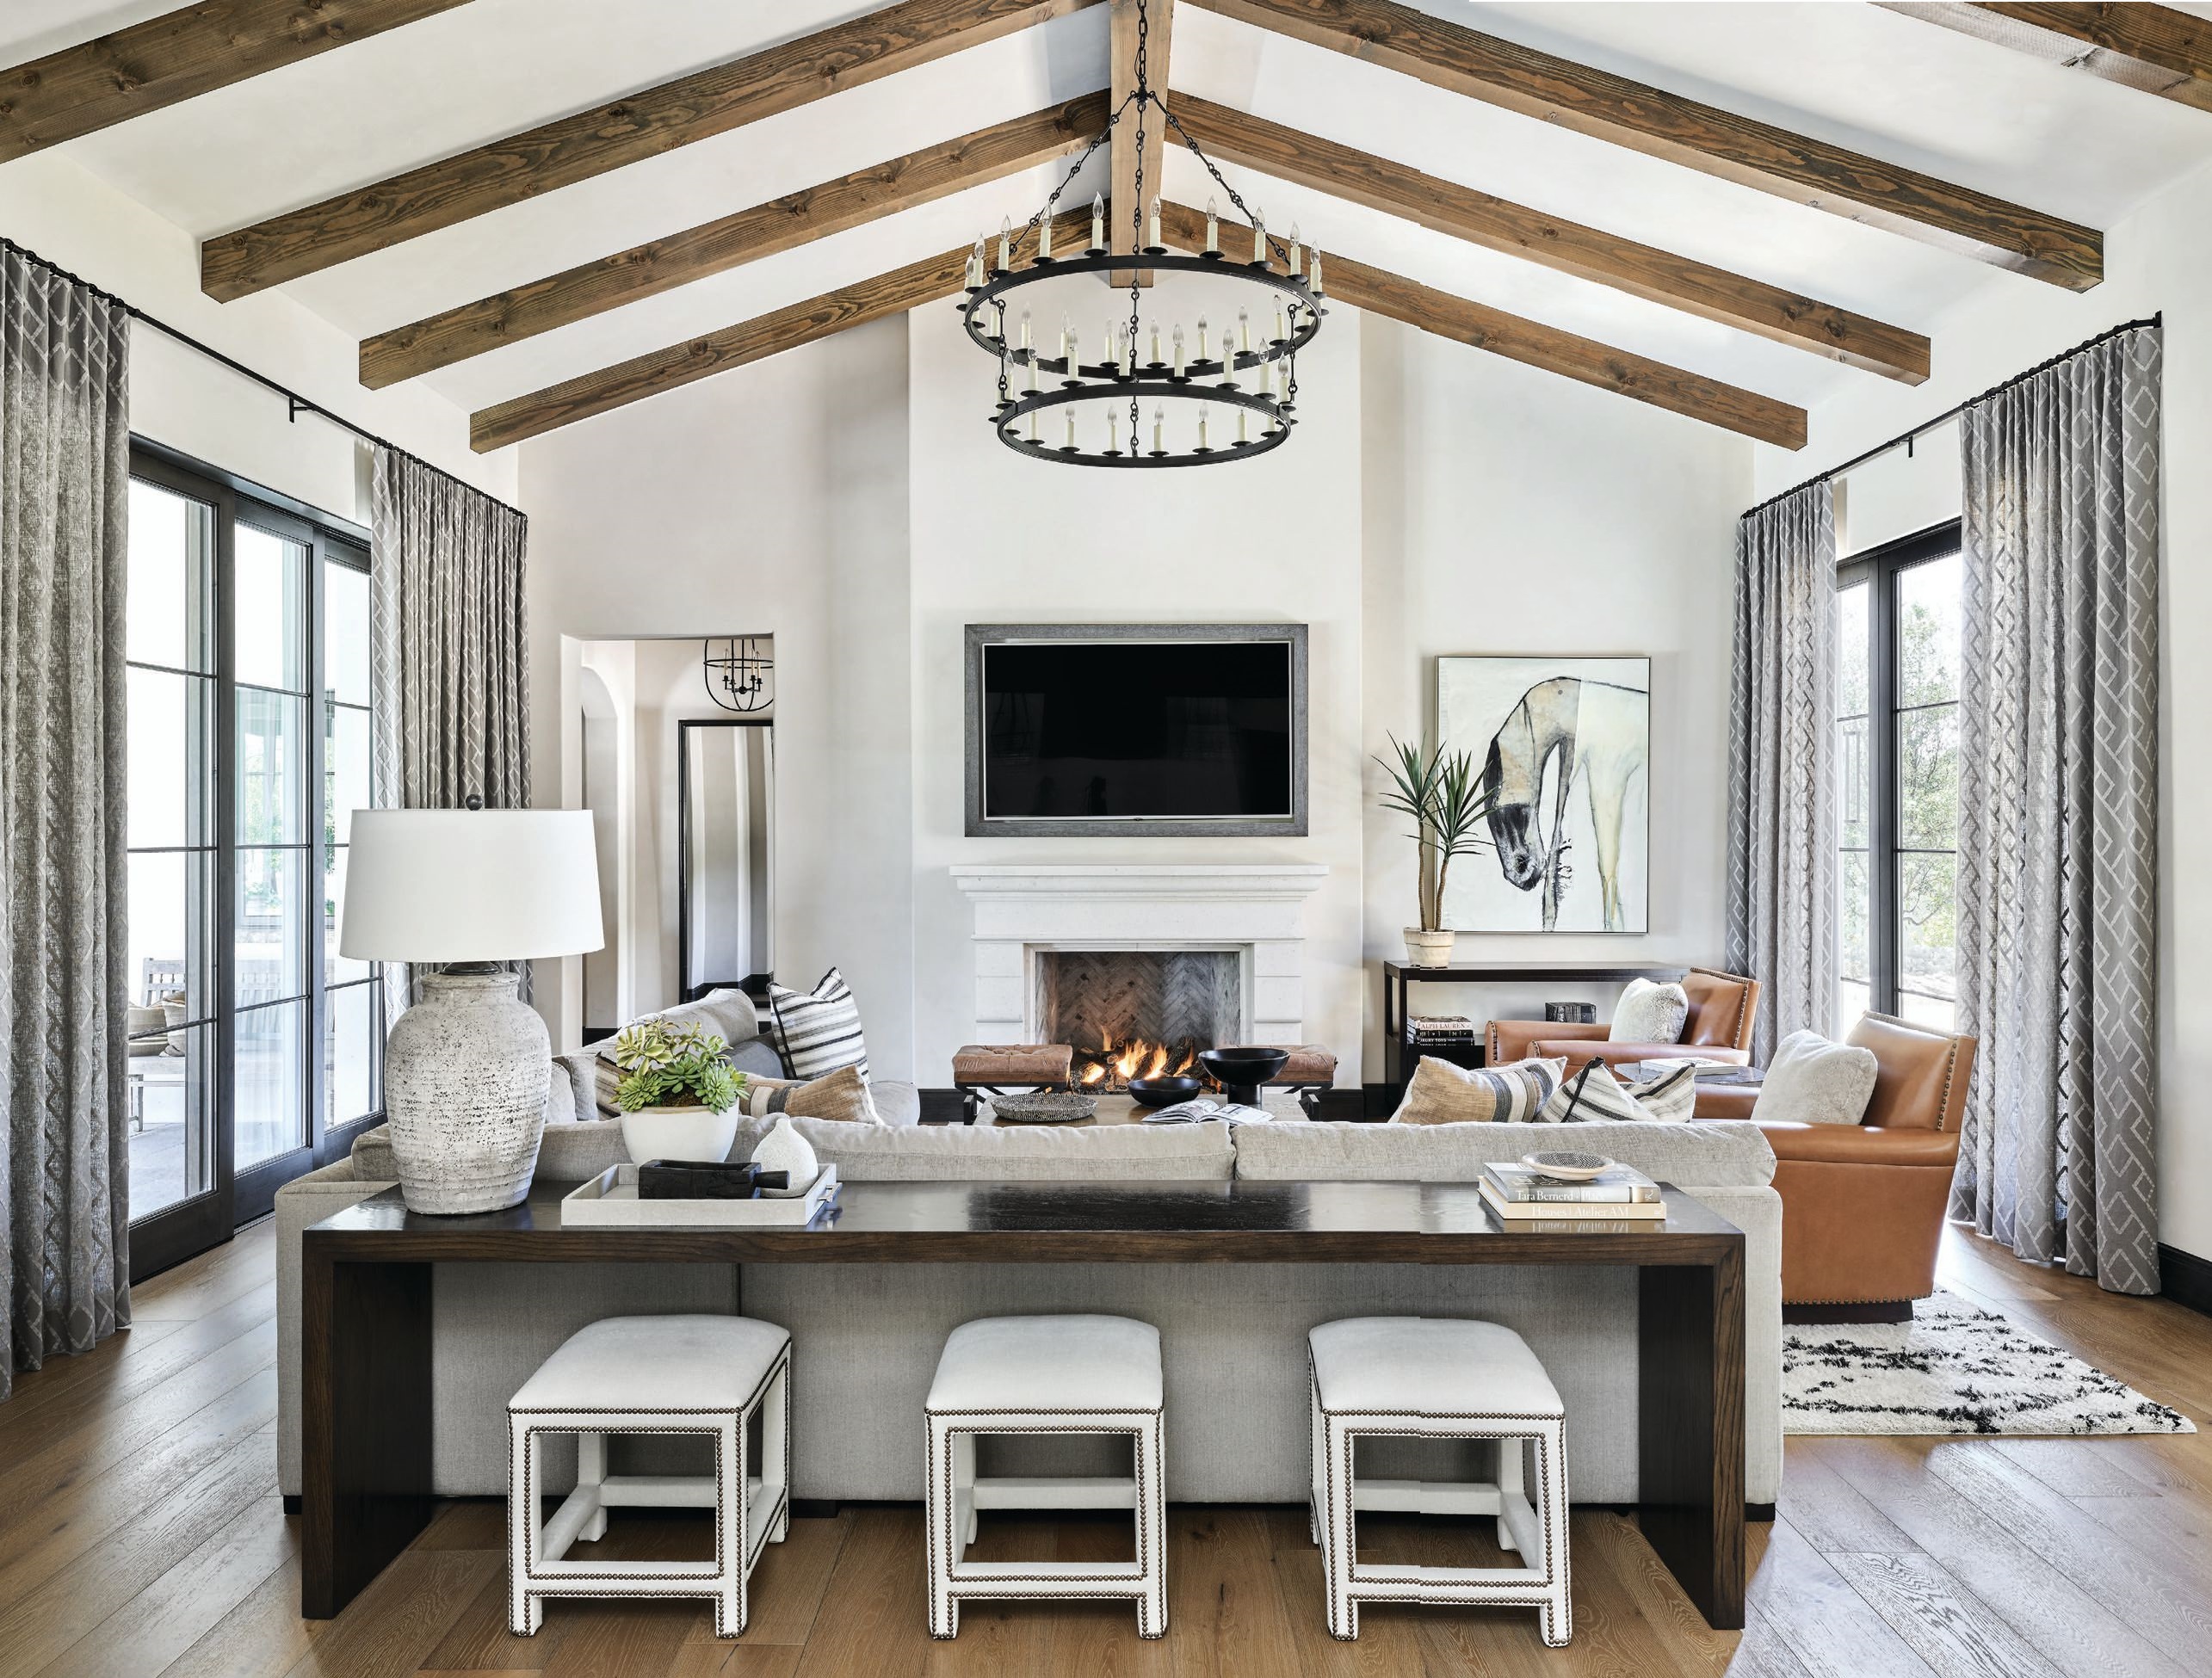 “The living room is the ultimate gathering space with generous and comfortable seating for all with a fabulous stone fireplace and a large TV,” says DeCesare PHOTOGRAPHED BY WERNER SEGARRA